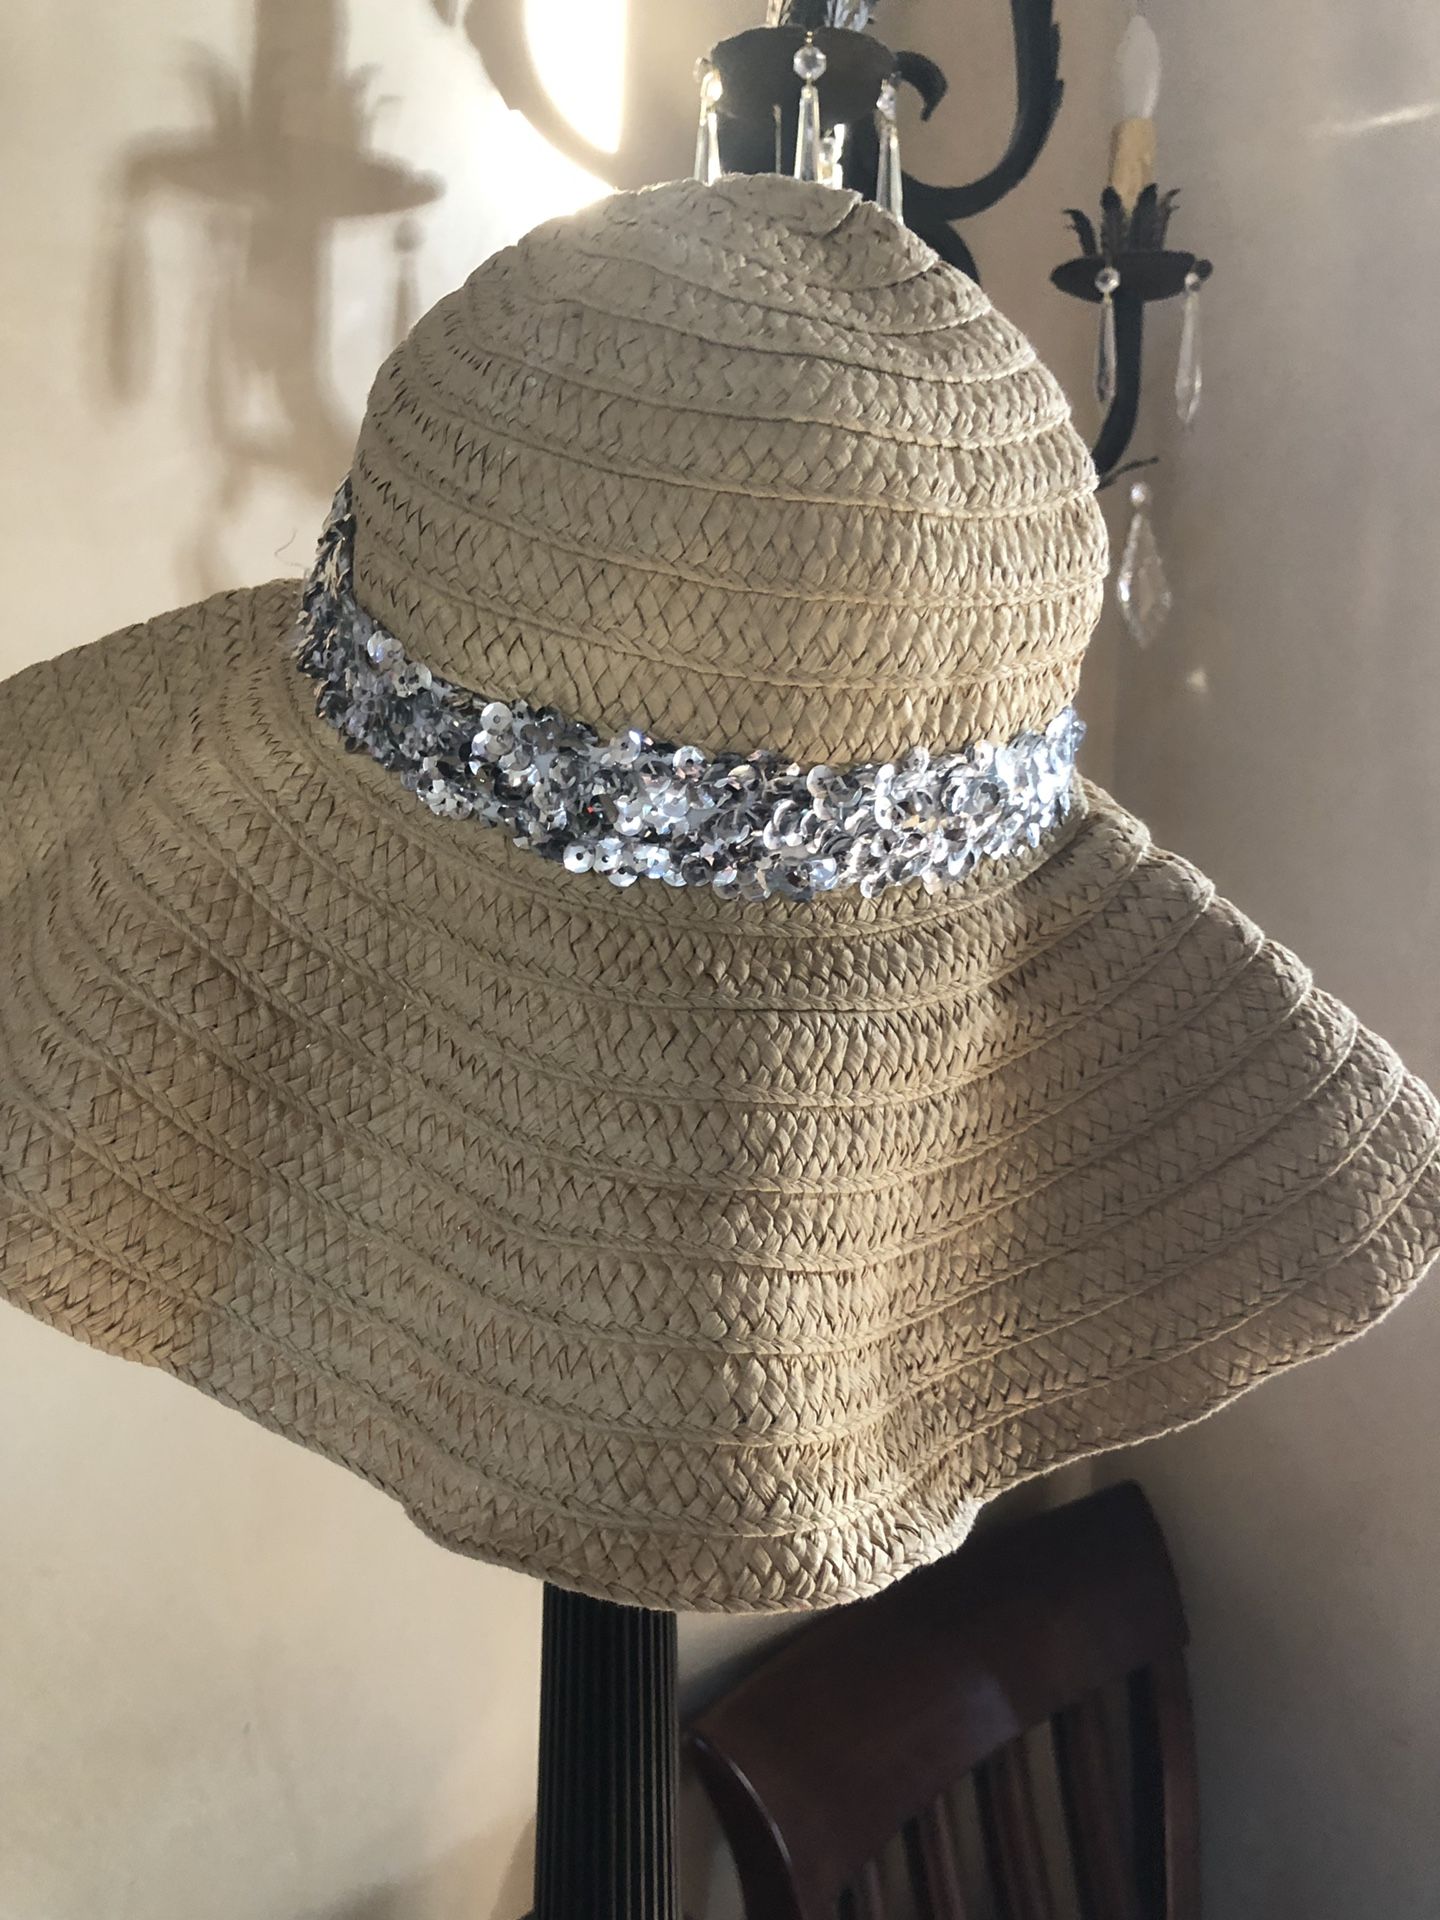 Juicy Couture straw hat with sequence